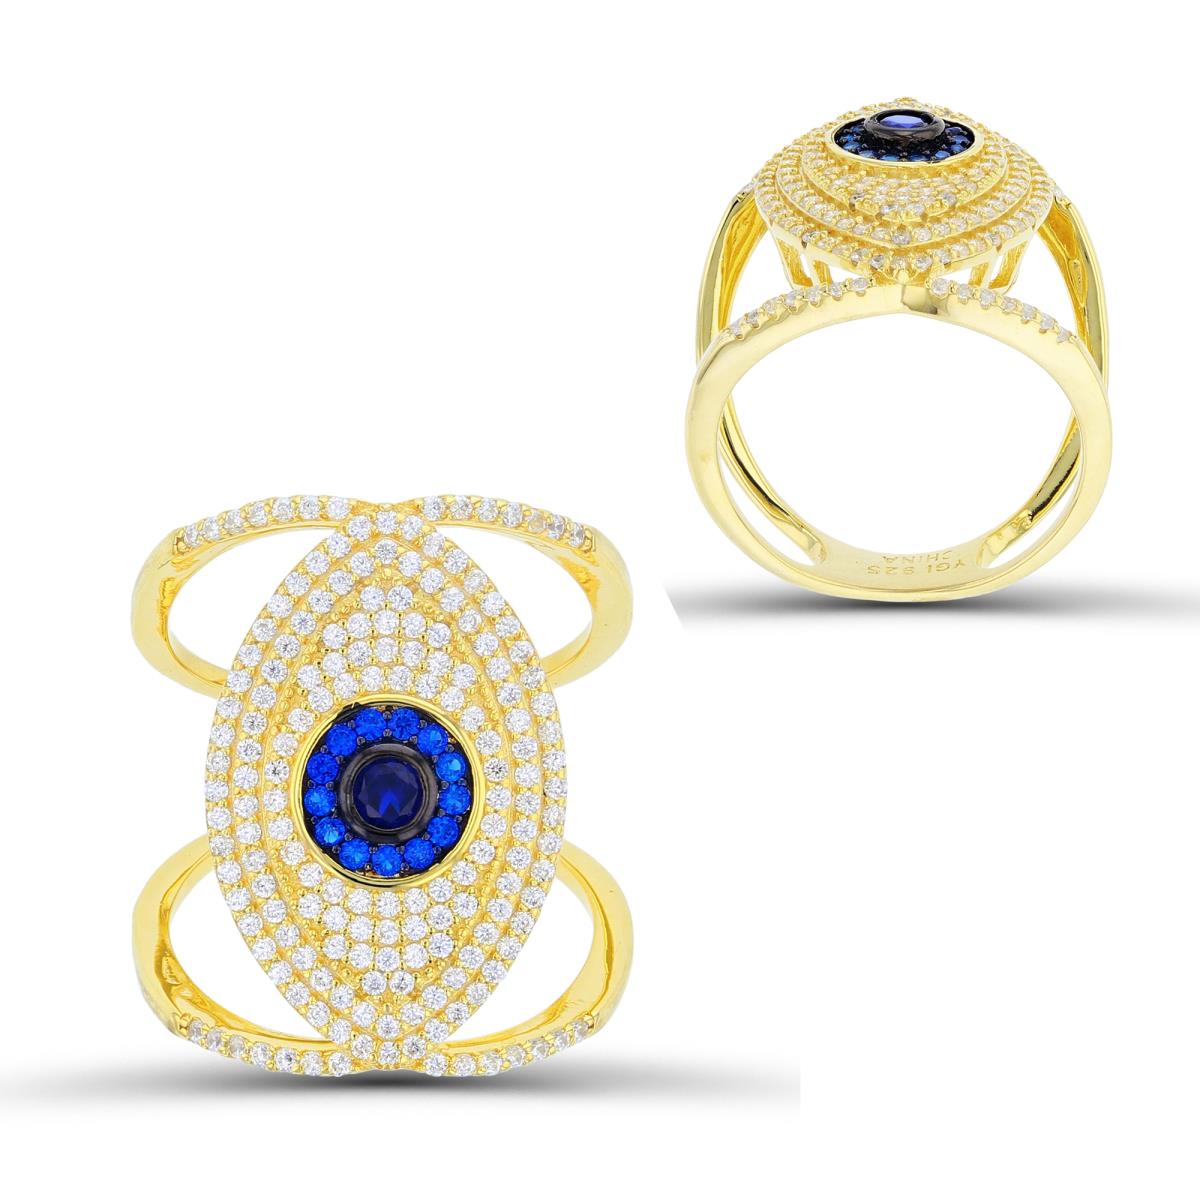 Sterling Silver Two-Tone (Y/B) Micropave Rnd #113 Blue Spinel & White CZ Evil Eye Open Ring